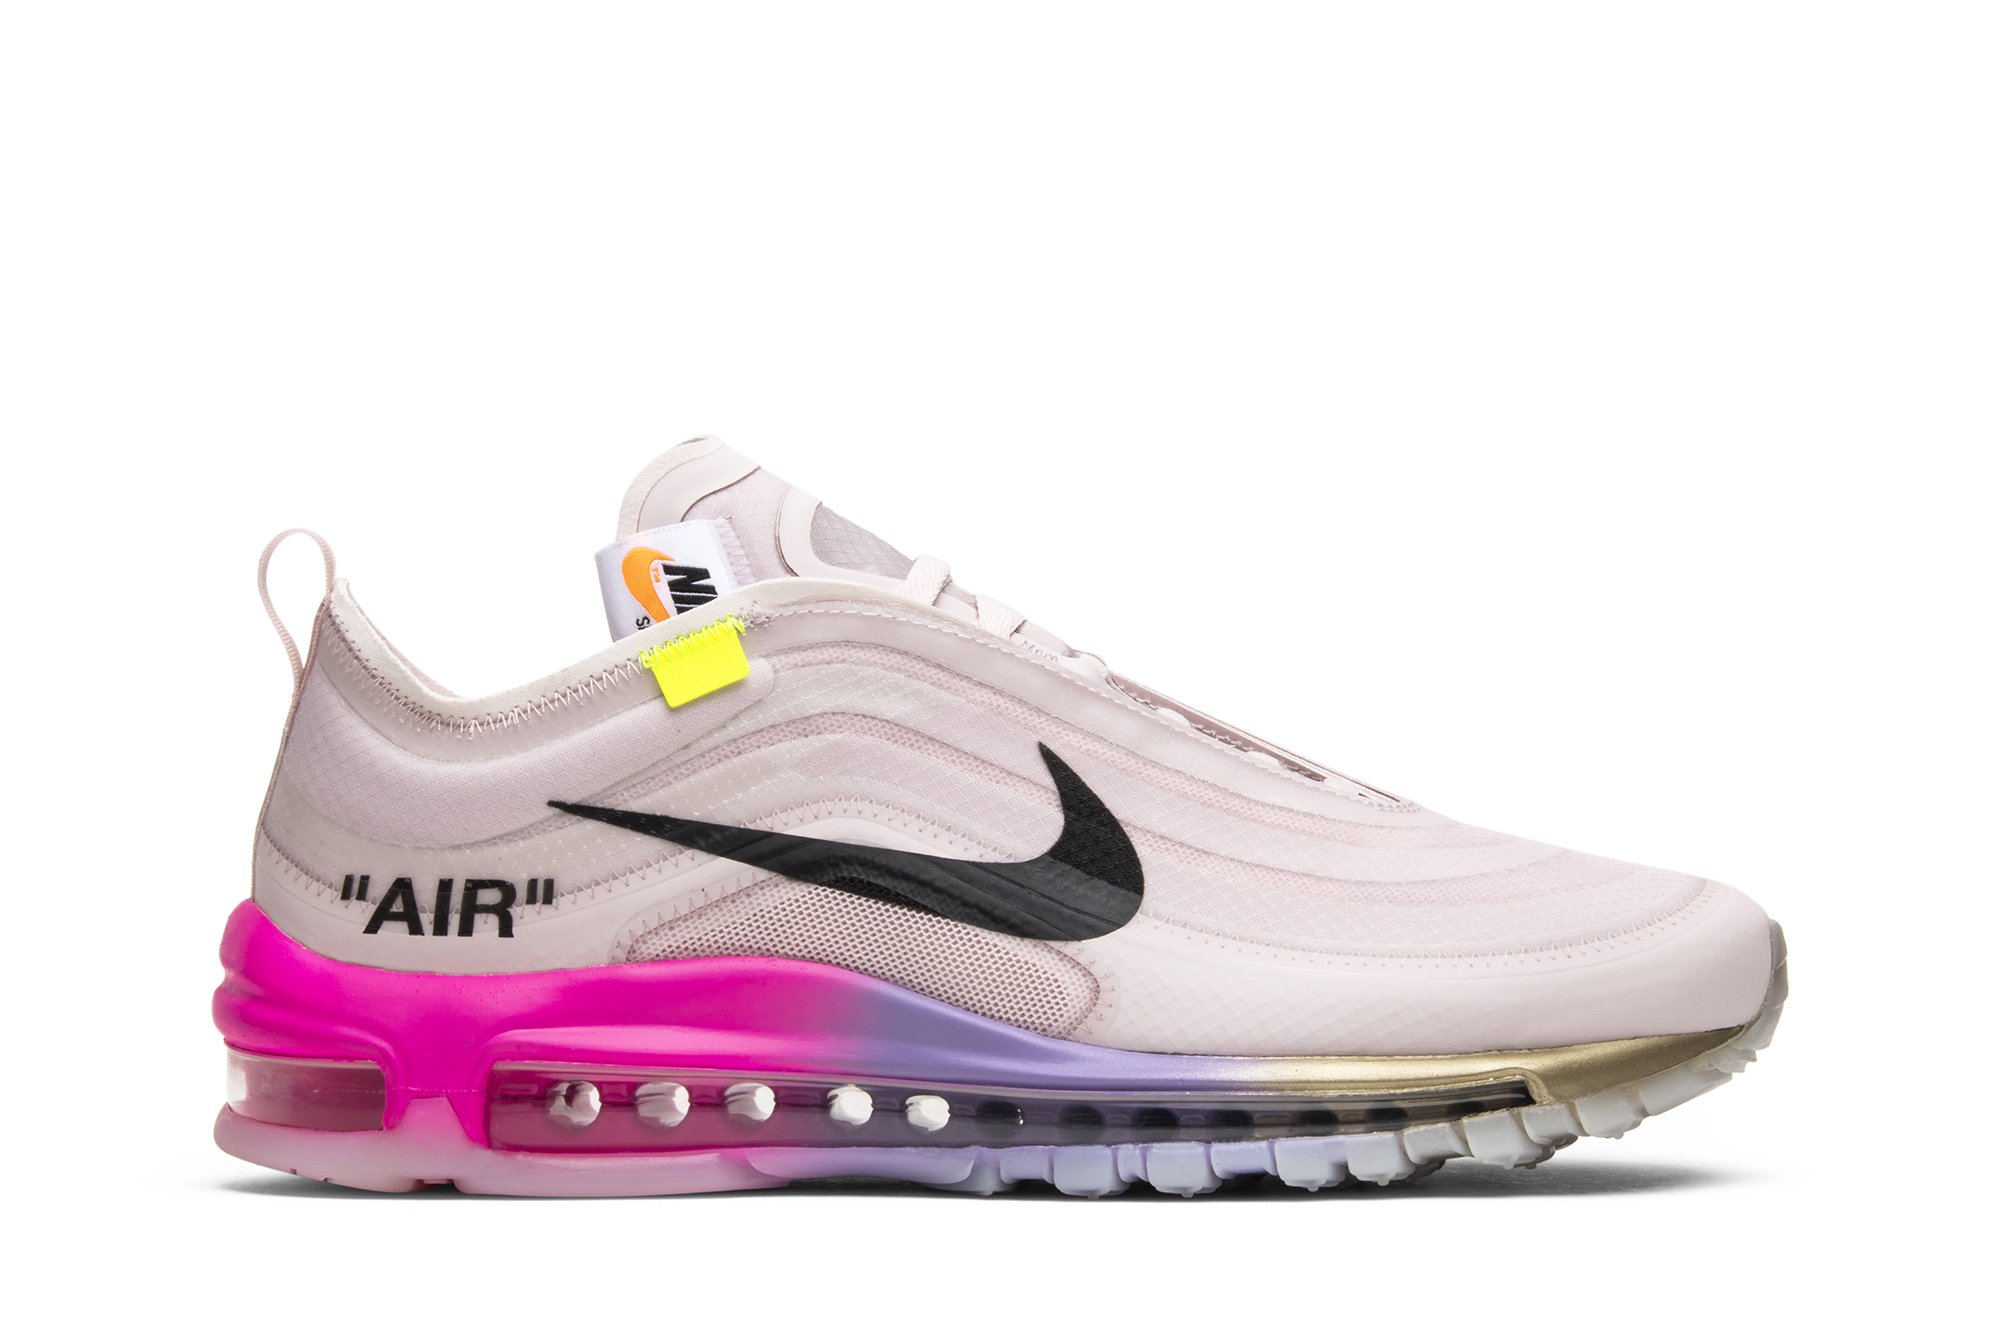 Serena Williams x Off-White x Air Max 97 OG 'Queen' | GOAT